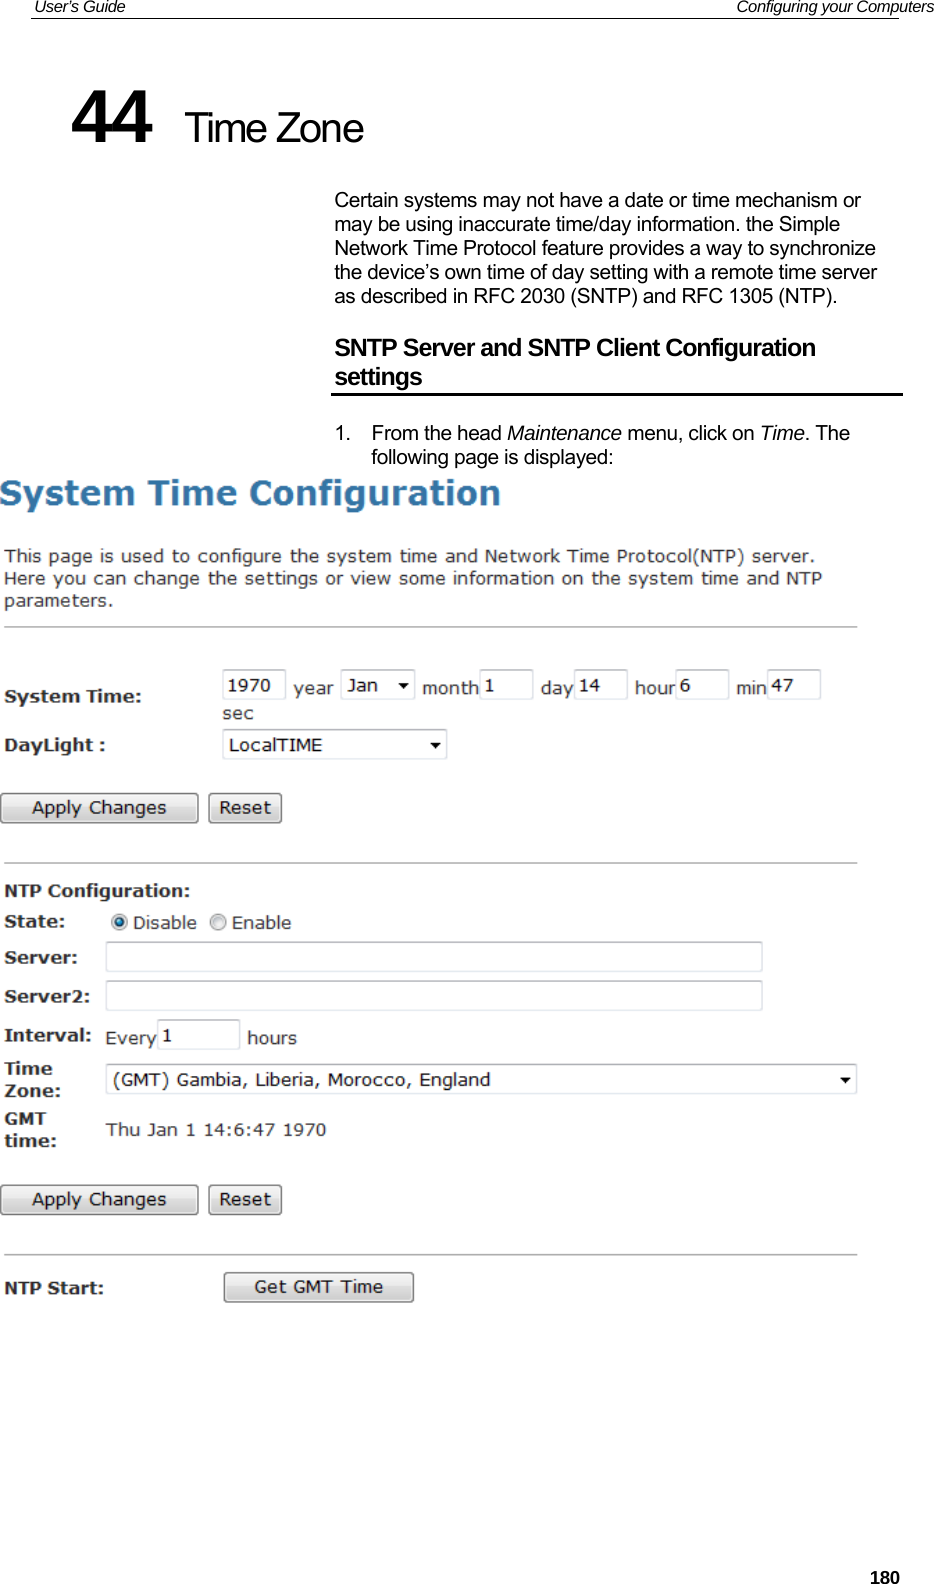 User’s Guide   Configuring your Computers 44  Time Zone Certain systems may not have a date or time mechanism or may be using inaccurate time/day information. the Simple Network Time Protocol feature provides a way to synchronize the device’s own time of day setting with a remote time server as described in RFC 2030 (SNTP) and RFC 1305 (NTP). SNTP Server and SNTP Client Configuration settings 1. From the head Maintenance menu, click on Time. The following page is displayed:          180